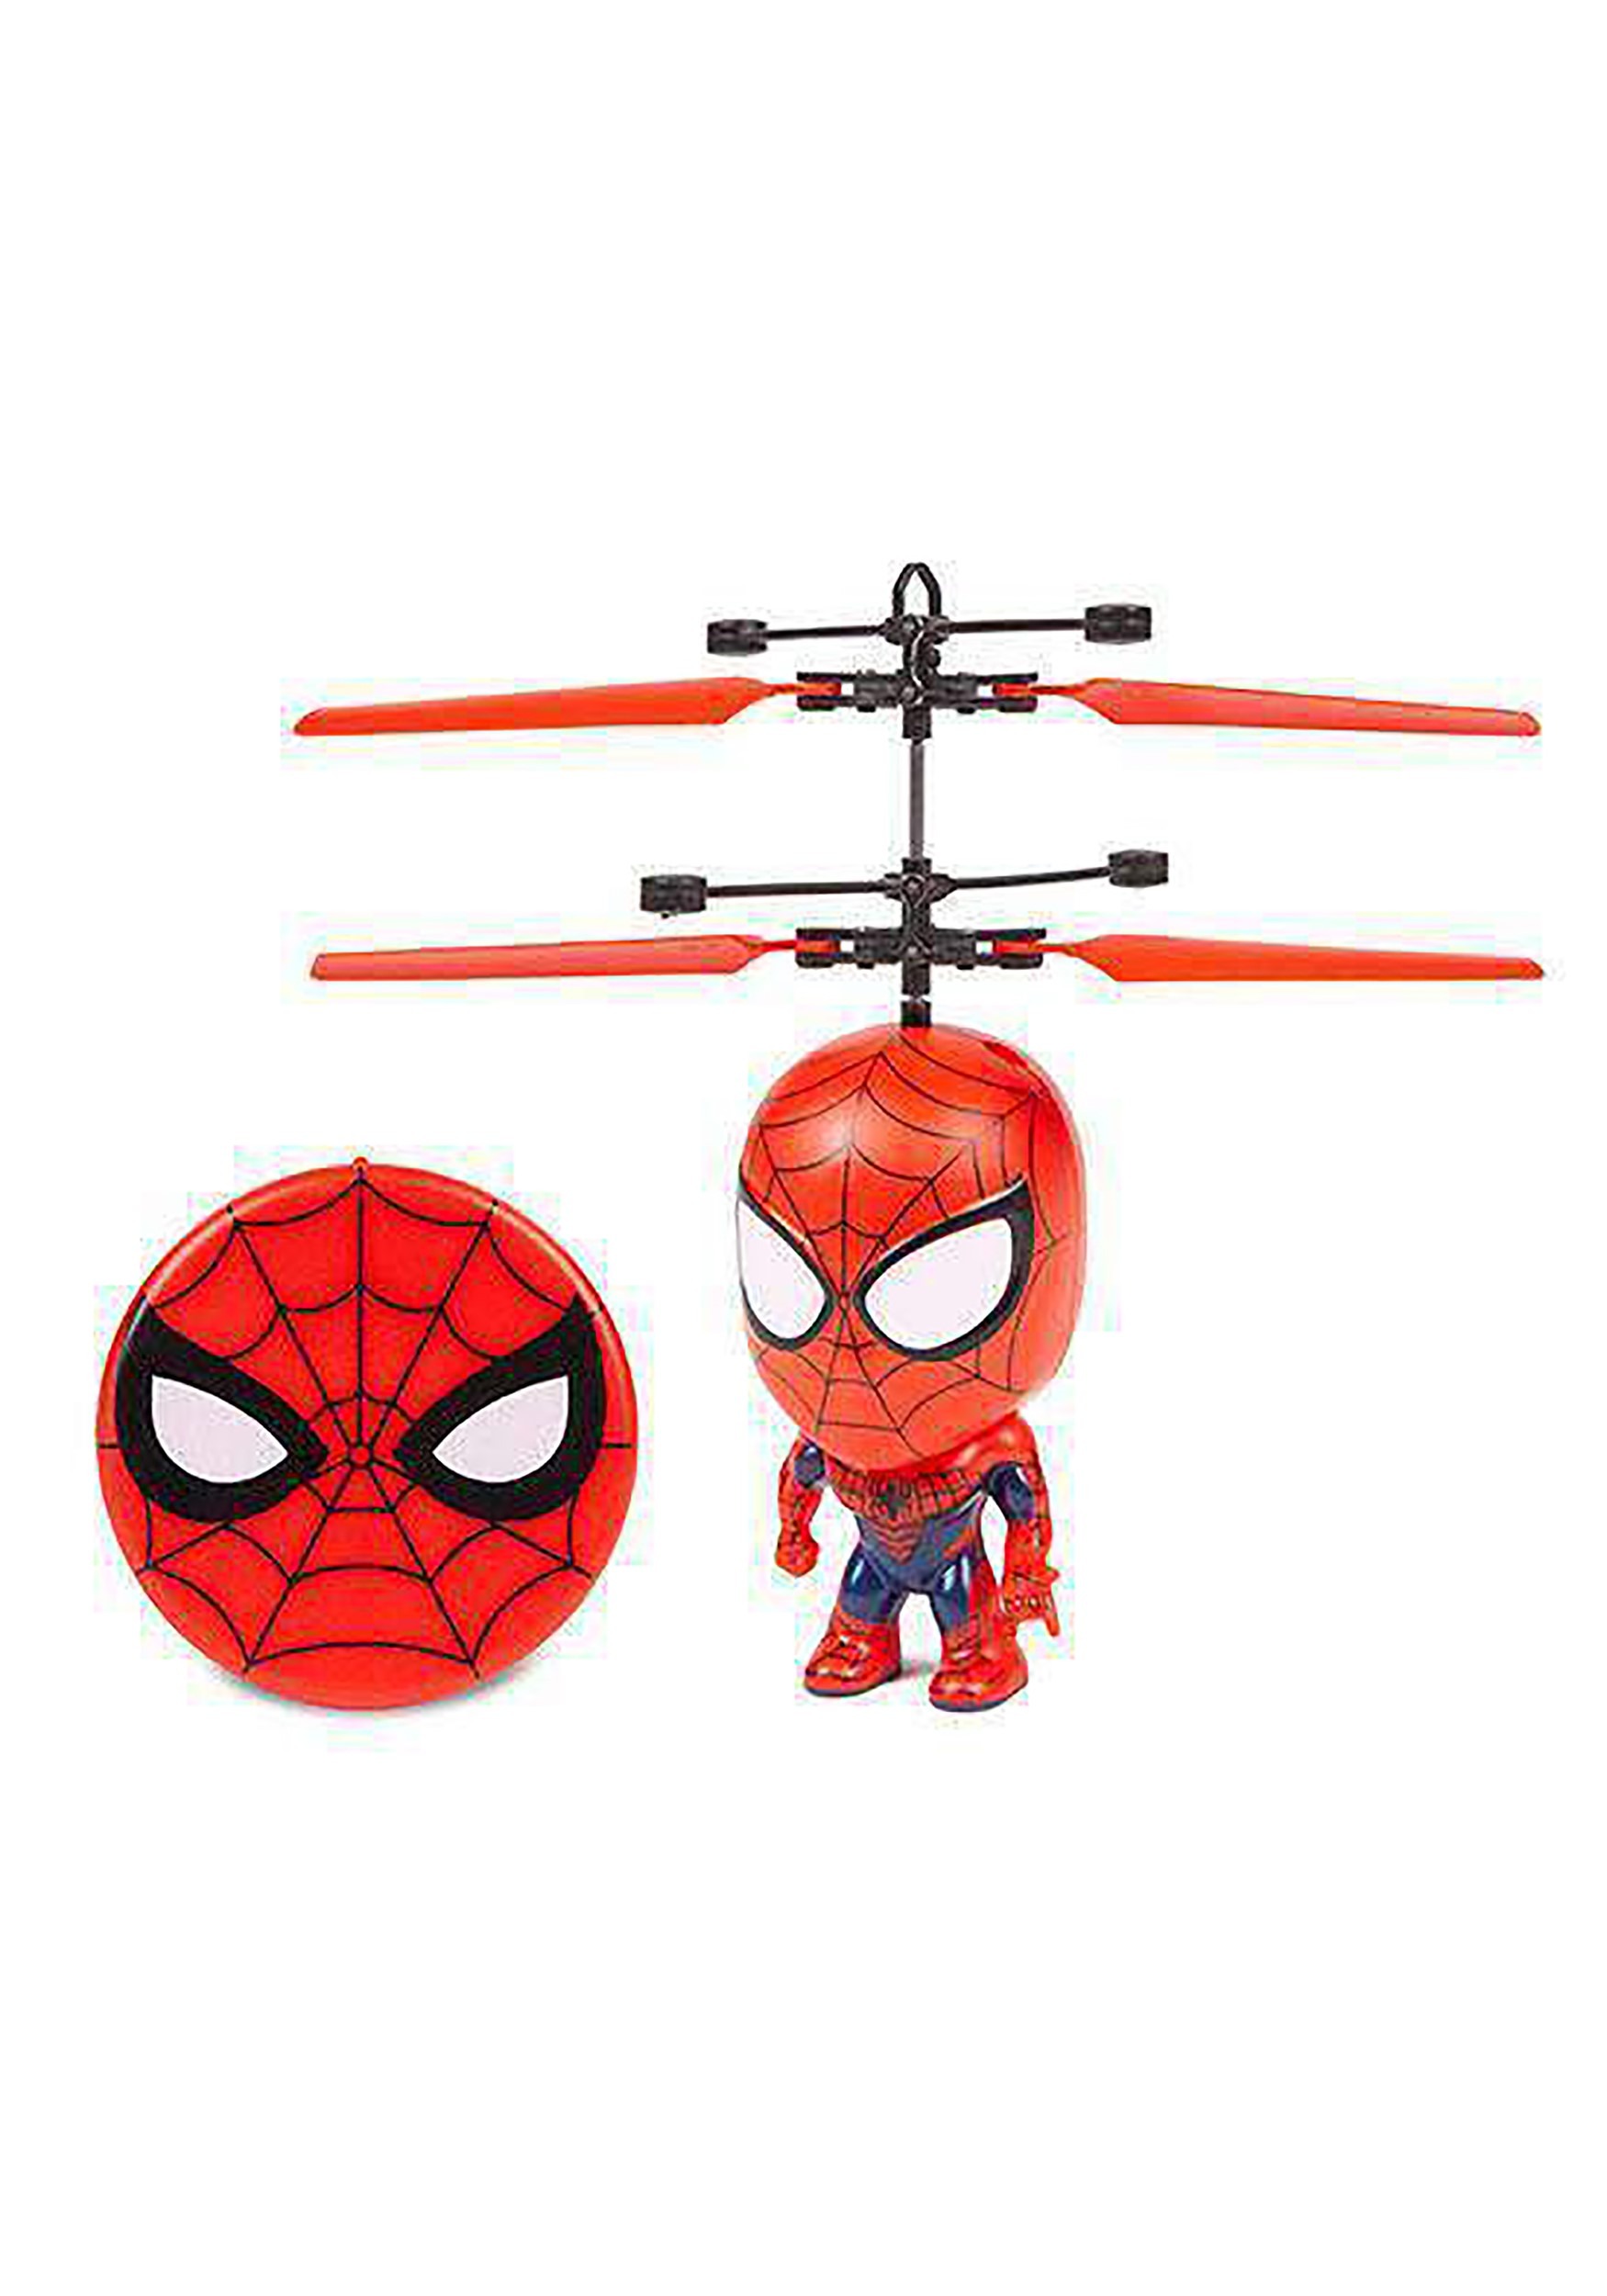 Marvel 3.5 Inch Spider-Man Flying Figure IR Helicopter